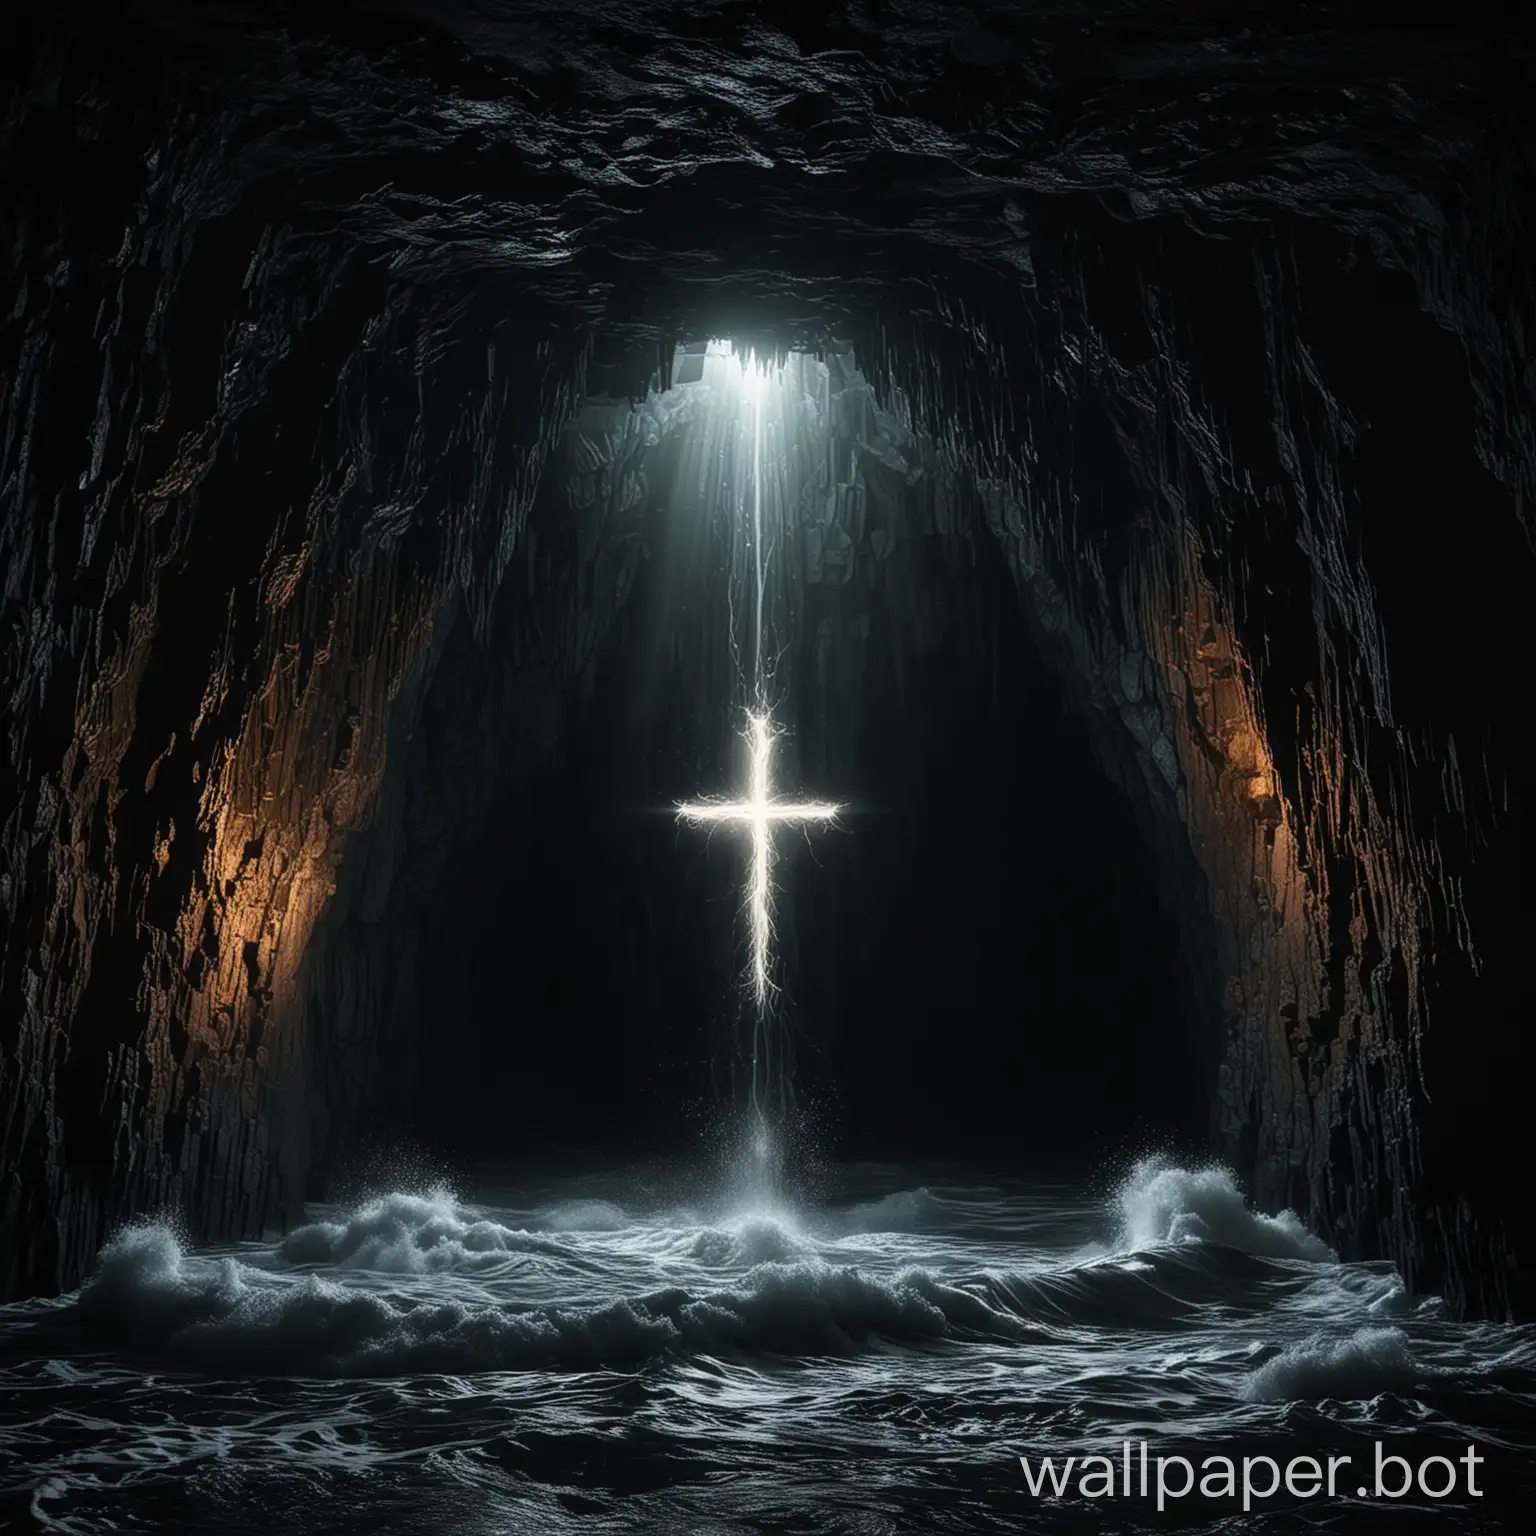 A dark  cave with the echo of waves flowing in it and a glowing cross in the center